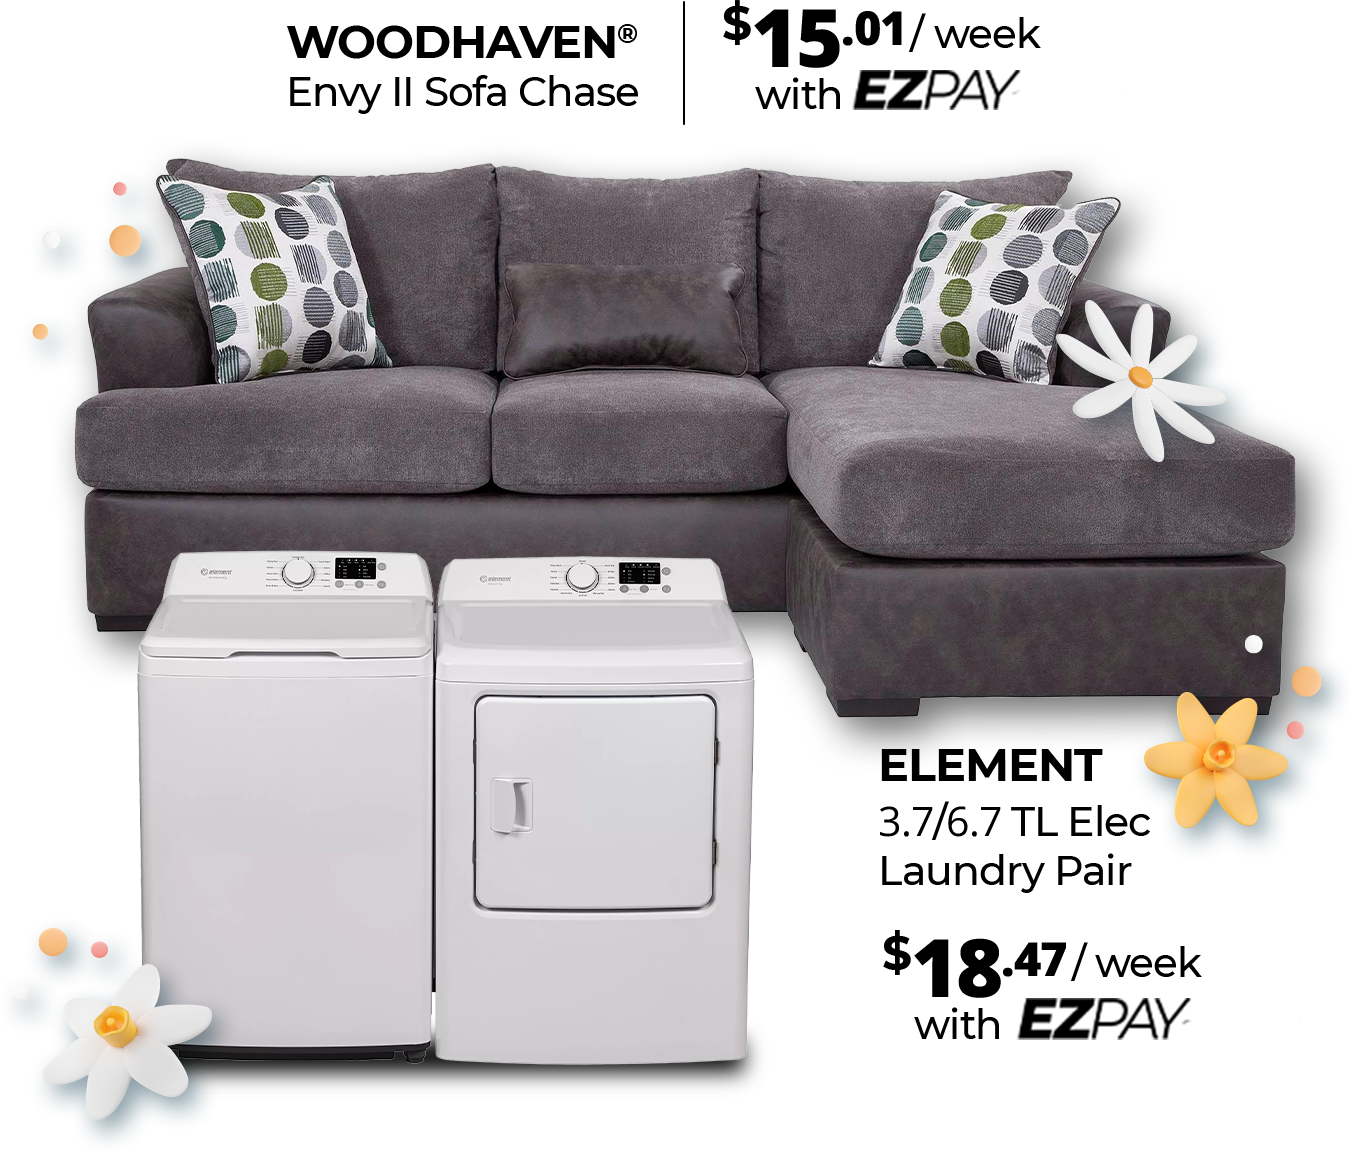 couch and washer/dryer set.